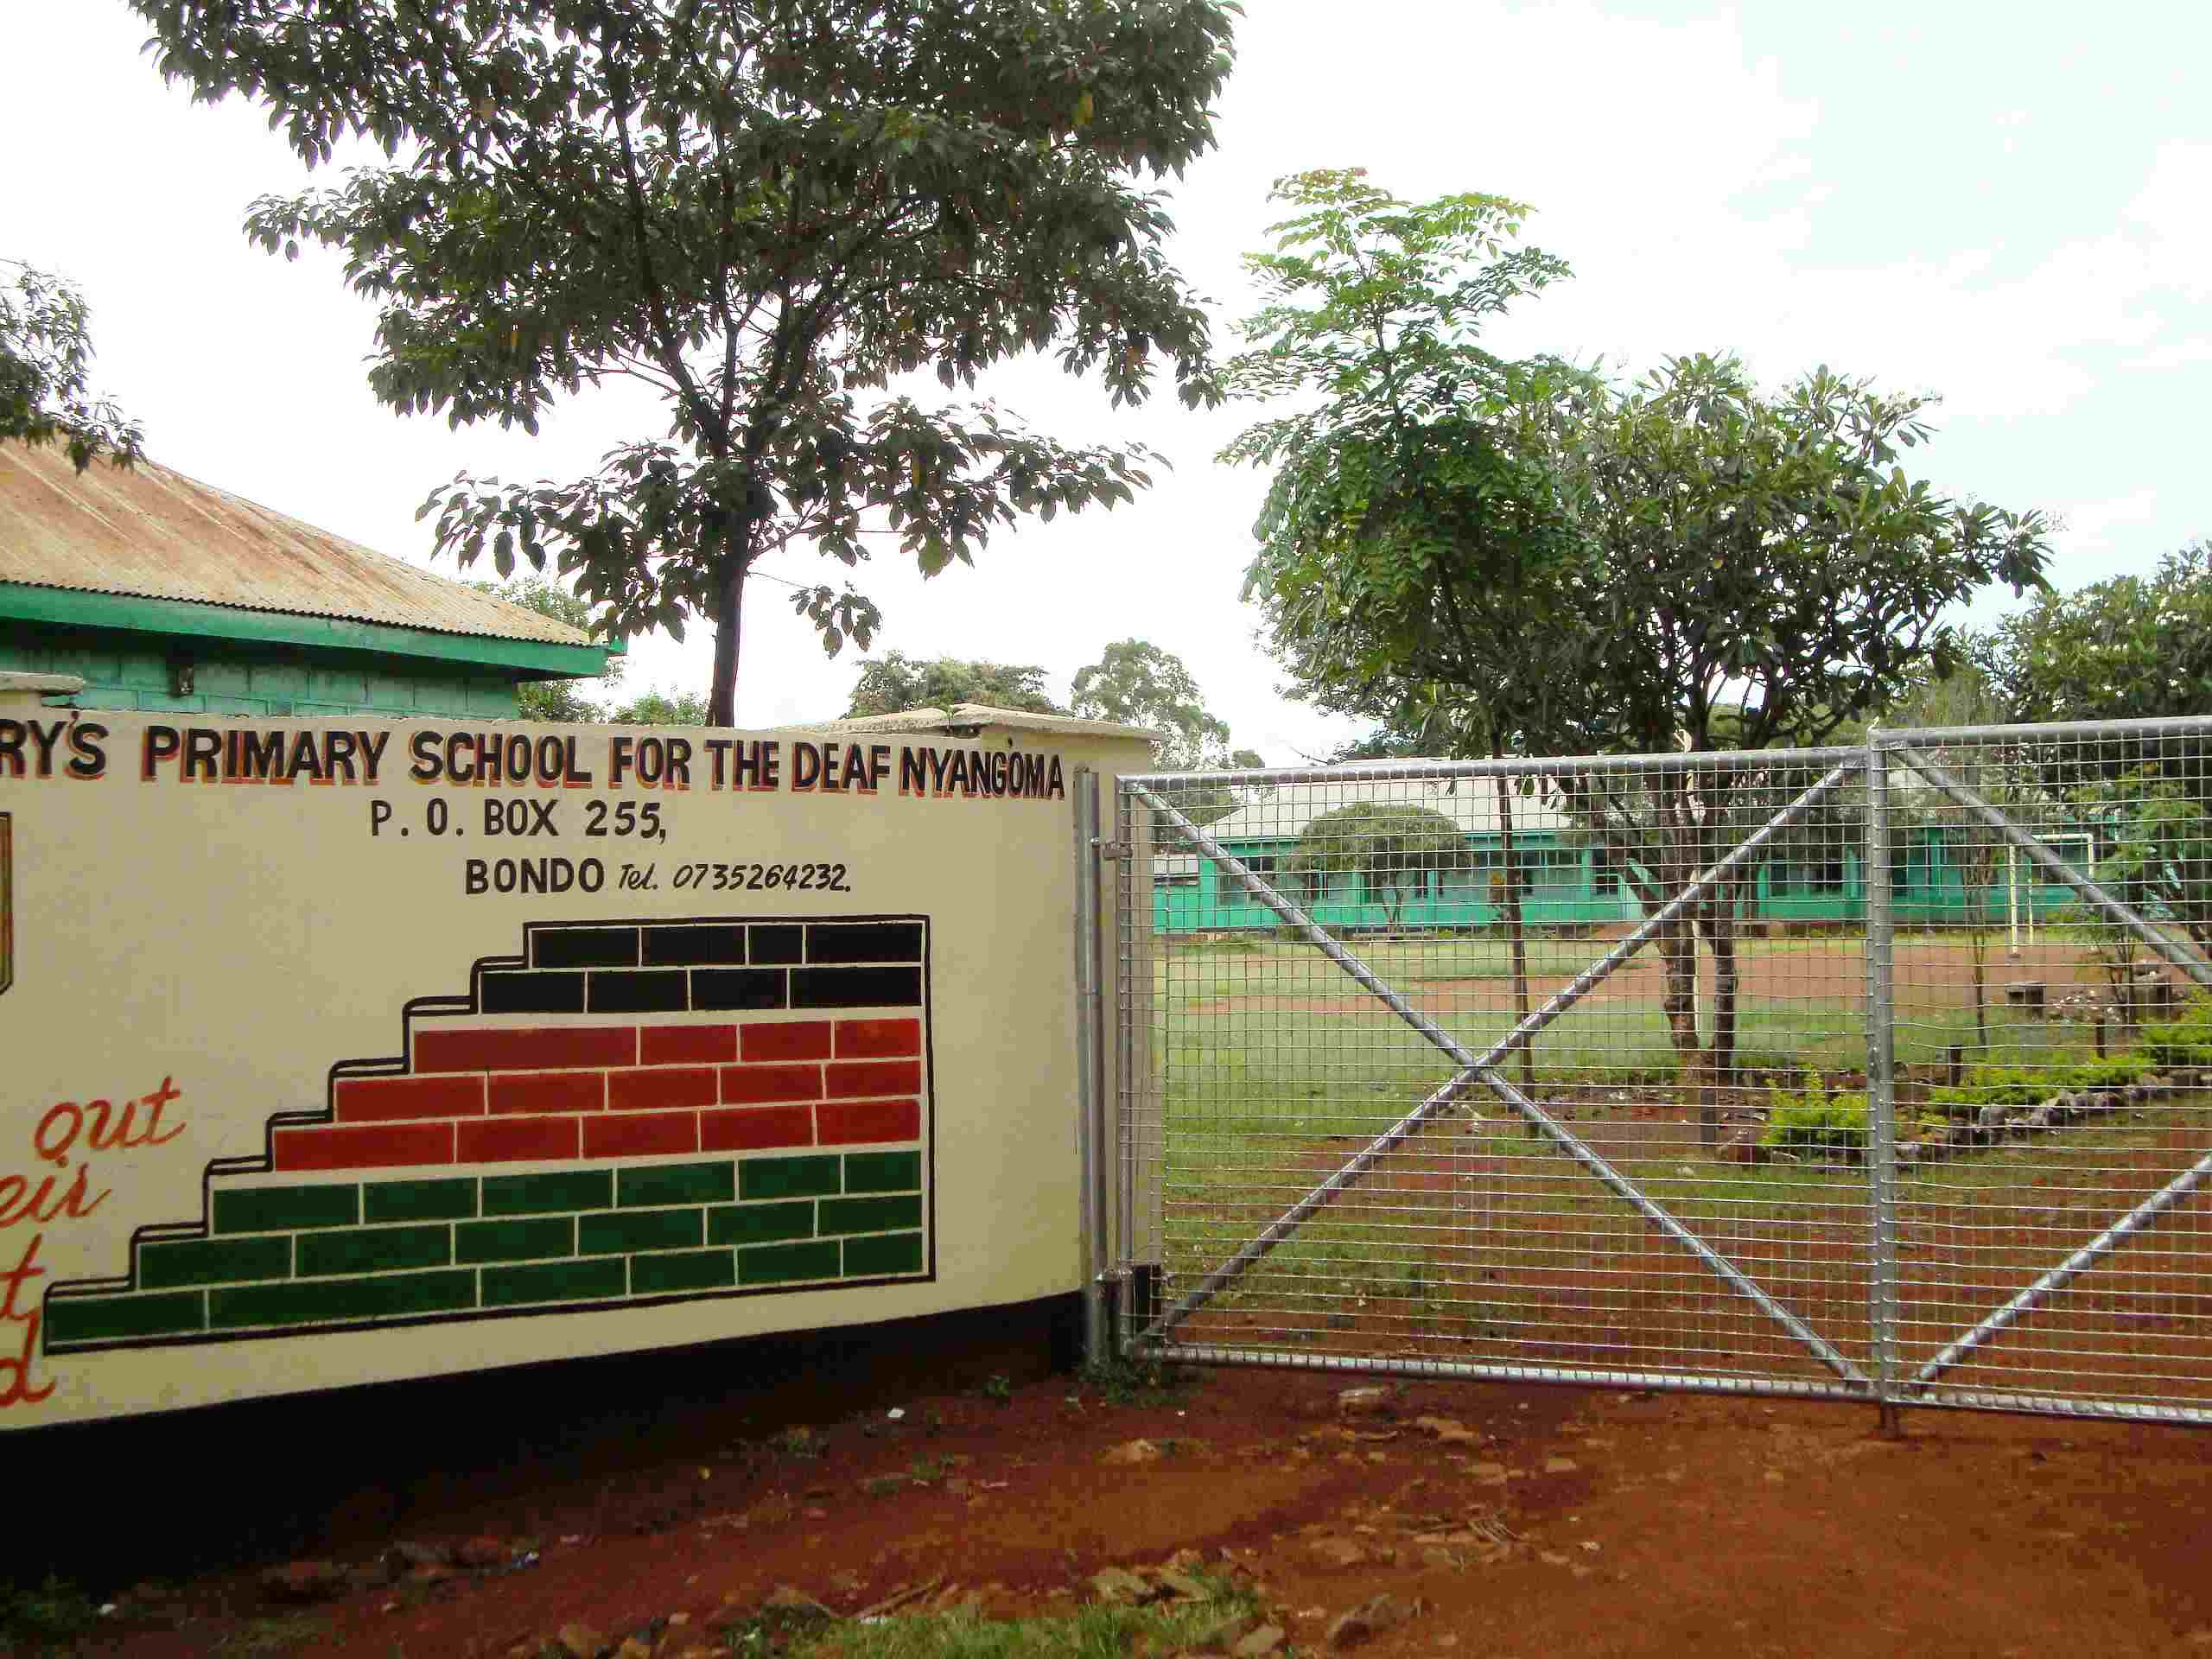 St Marys Primary School for the Deaf - Nyangoma